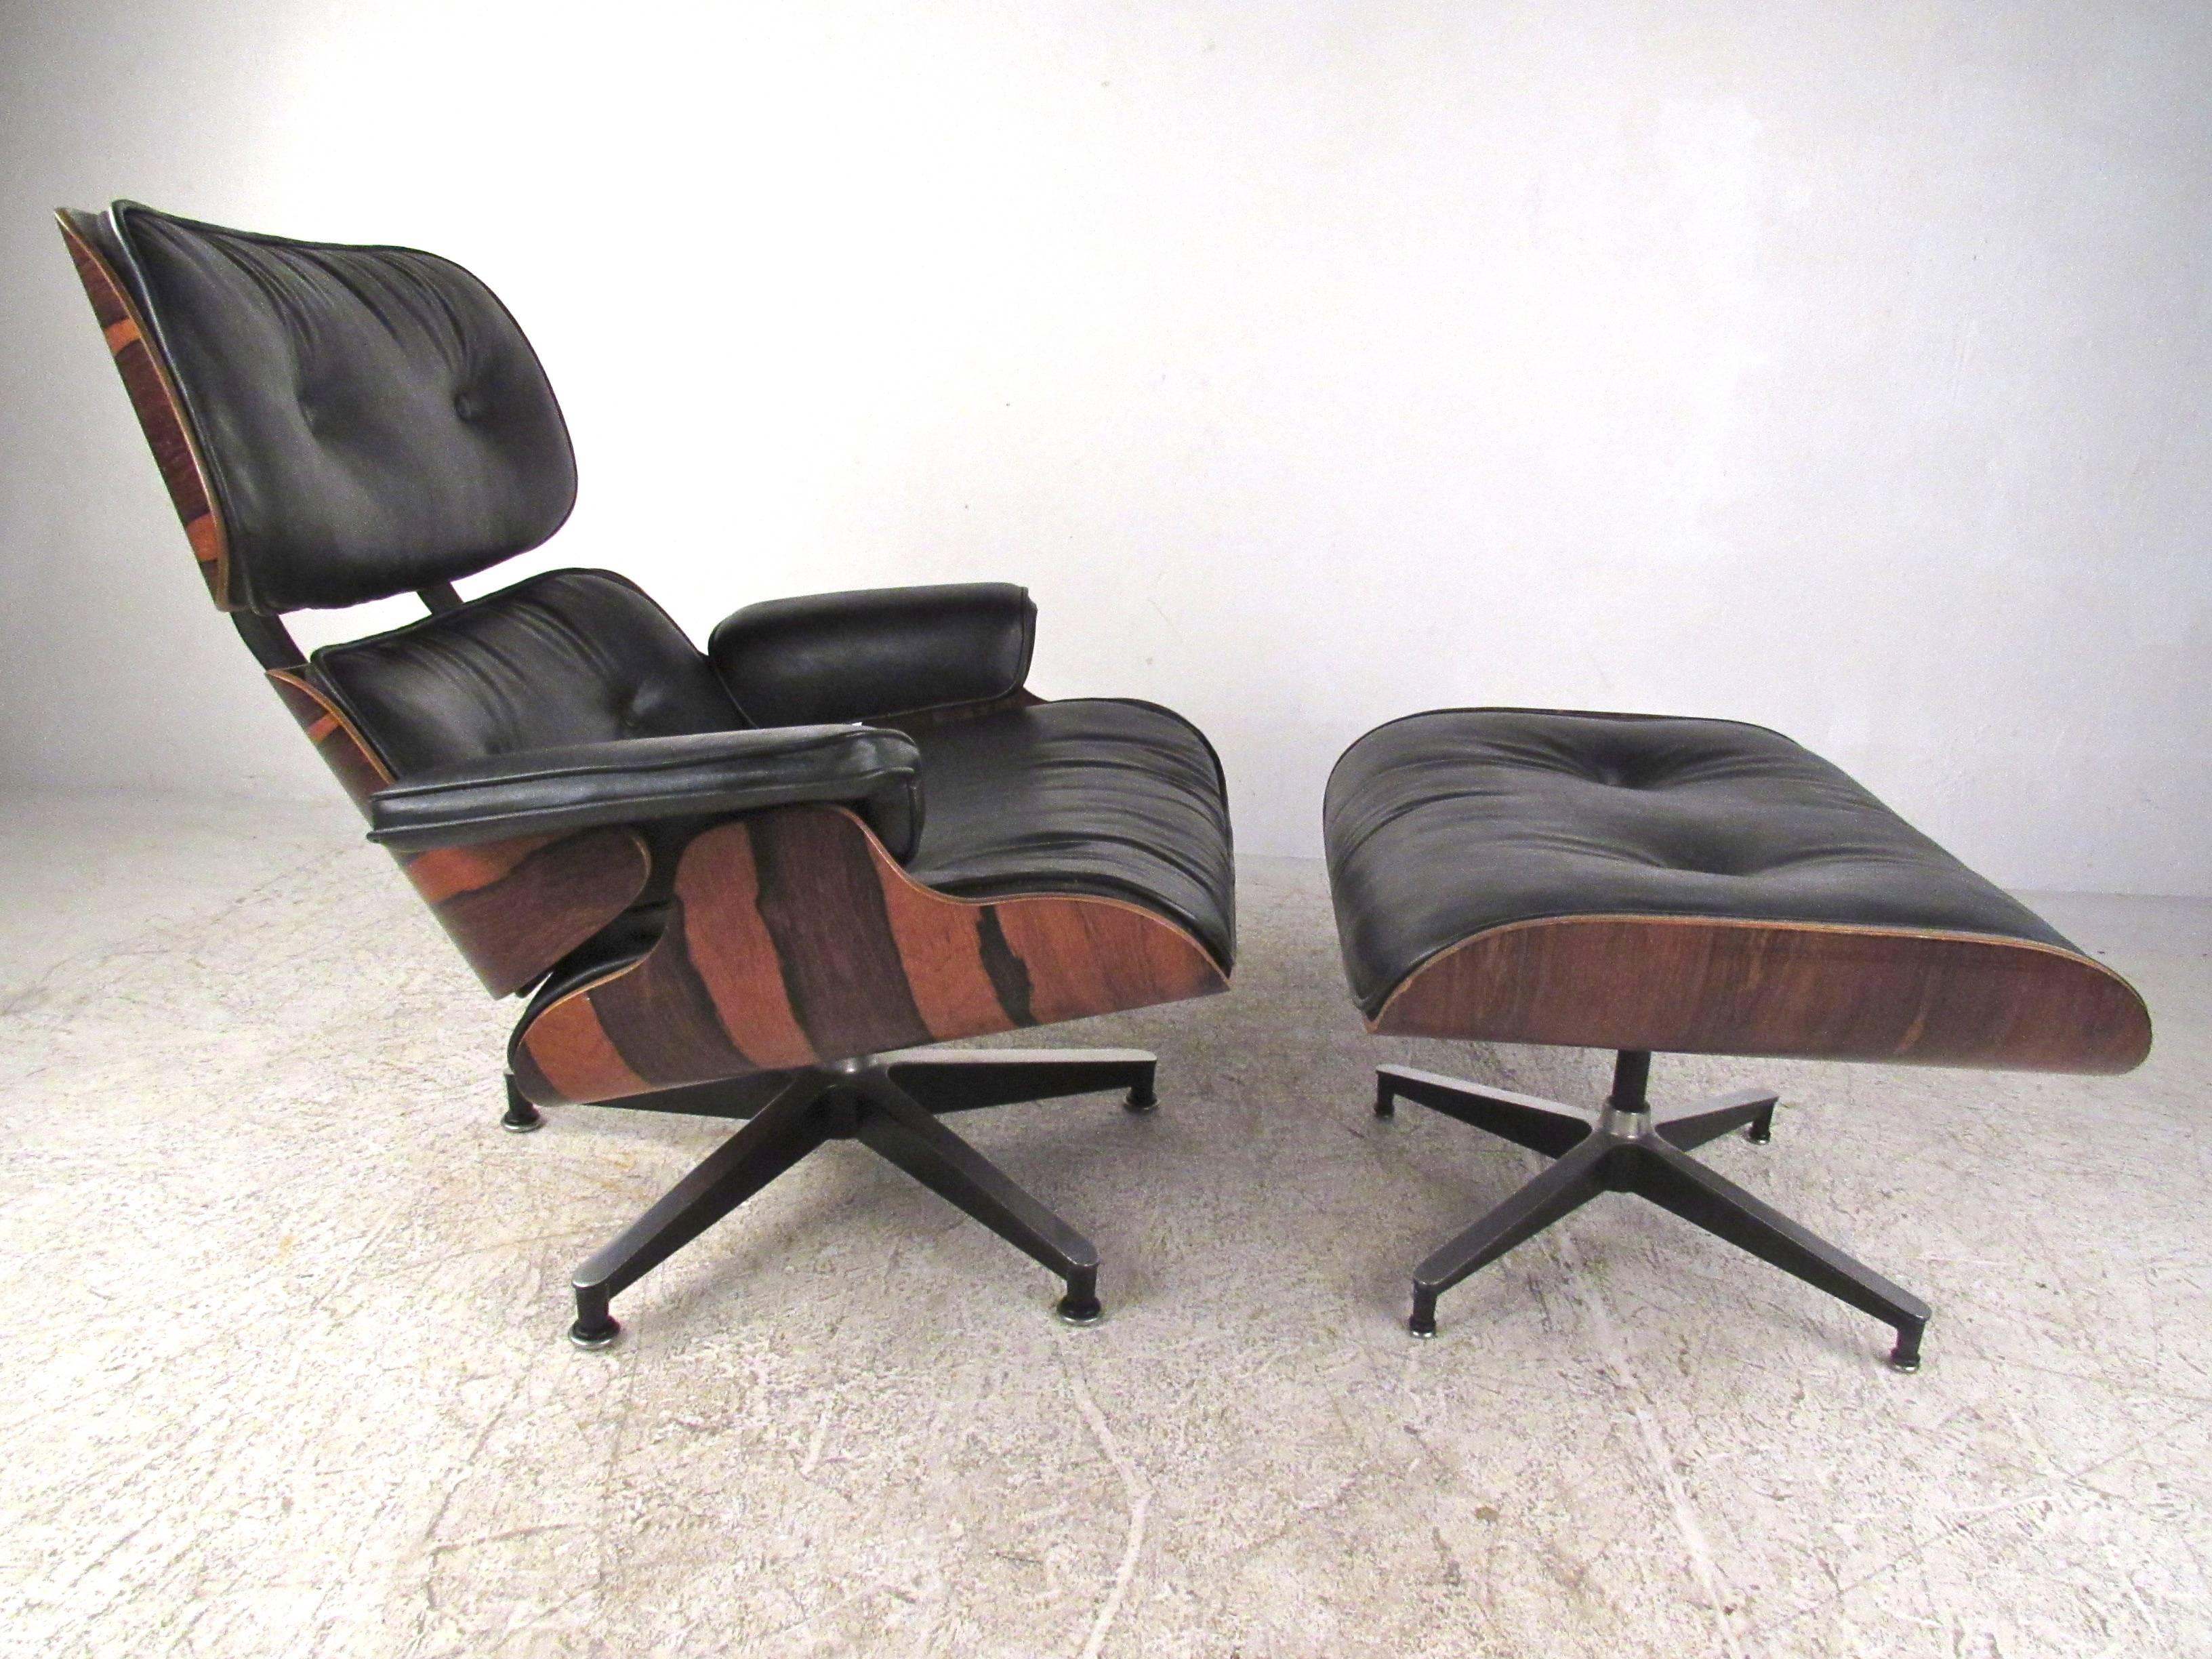 This vintage swivel lounge chair in Brazilian rosewood features the classic Mid-Century style of Charles Eames as designed for Herman Miller sometime between 1960-1971. This matching chair and ottoman offer the perfect mix of style and comfort.